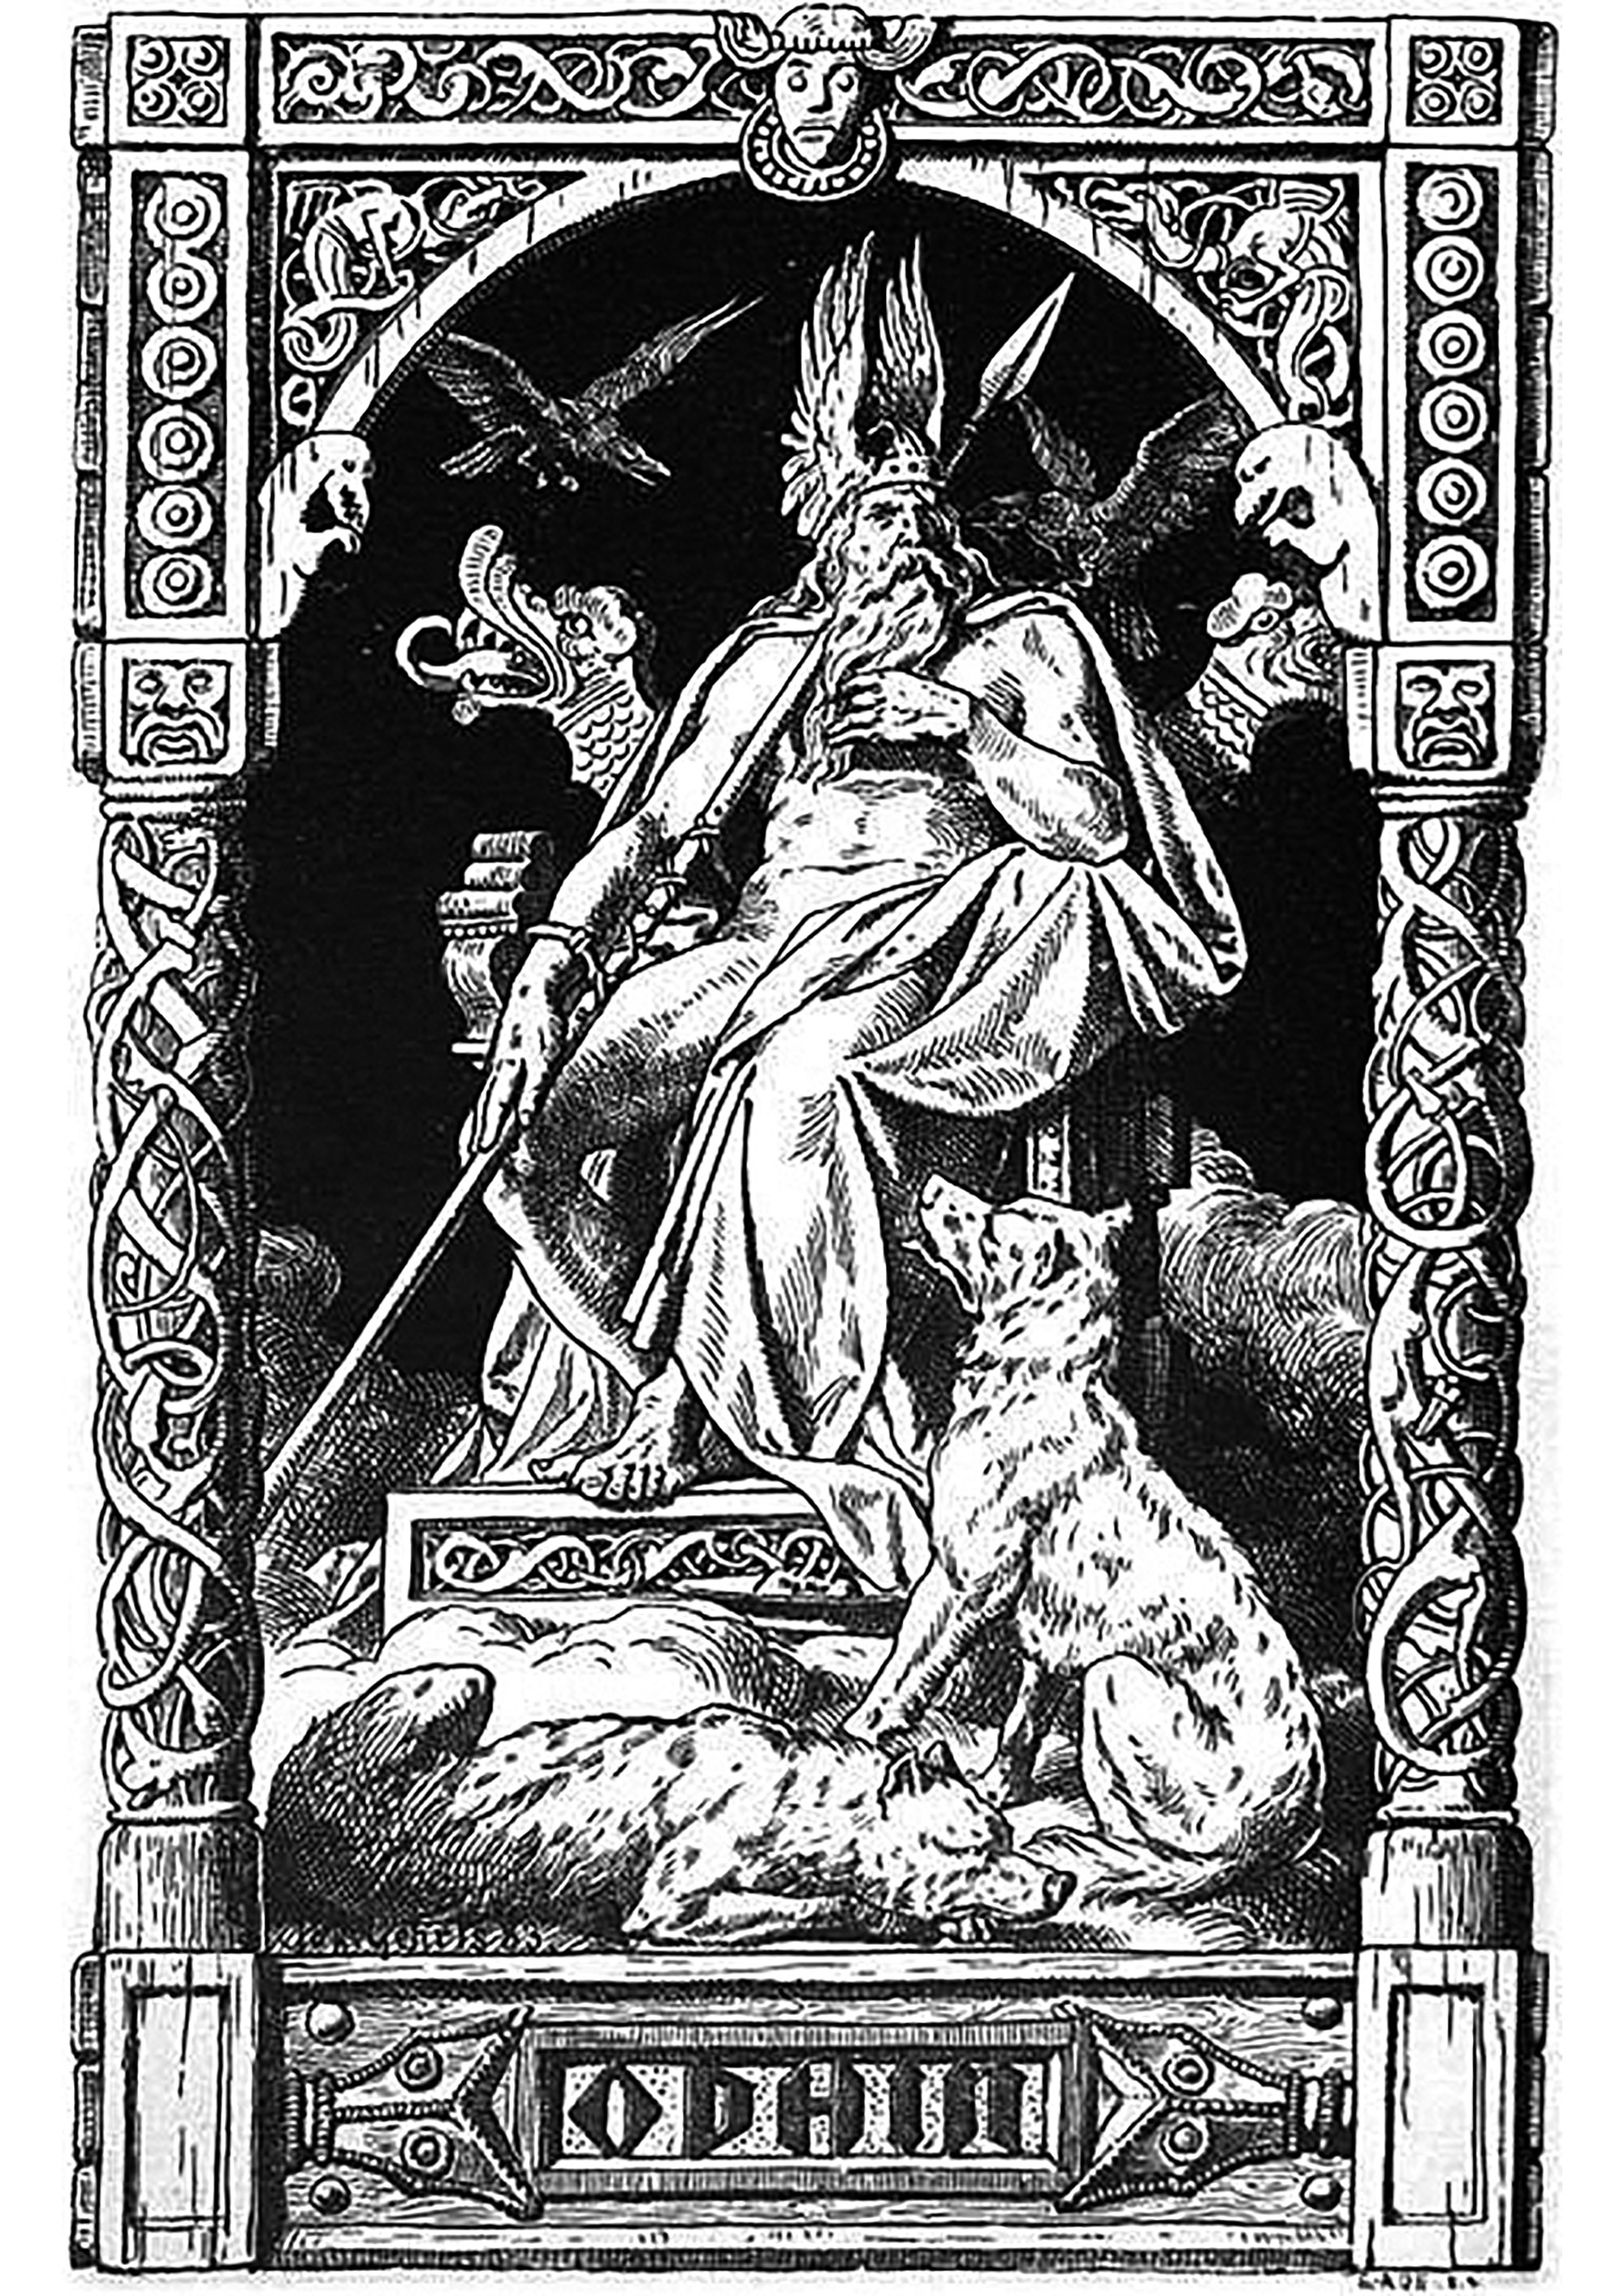 Odin - illustration de Johannes Gehrts (1855, 1921). This illustration shows Odin, the main god of Norse mythology, enthroned on his throne. He is surrounded by his two ravens, Hugin and Munin, who are his messengers, reporting to him all that is happening in the world.